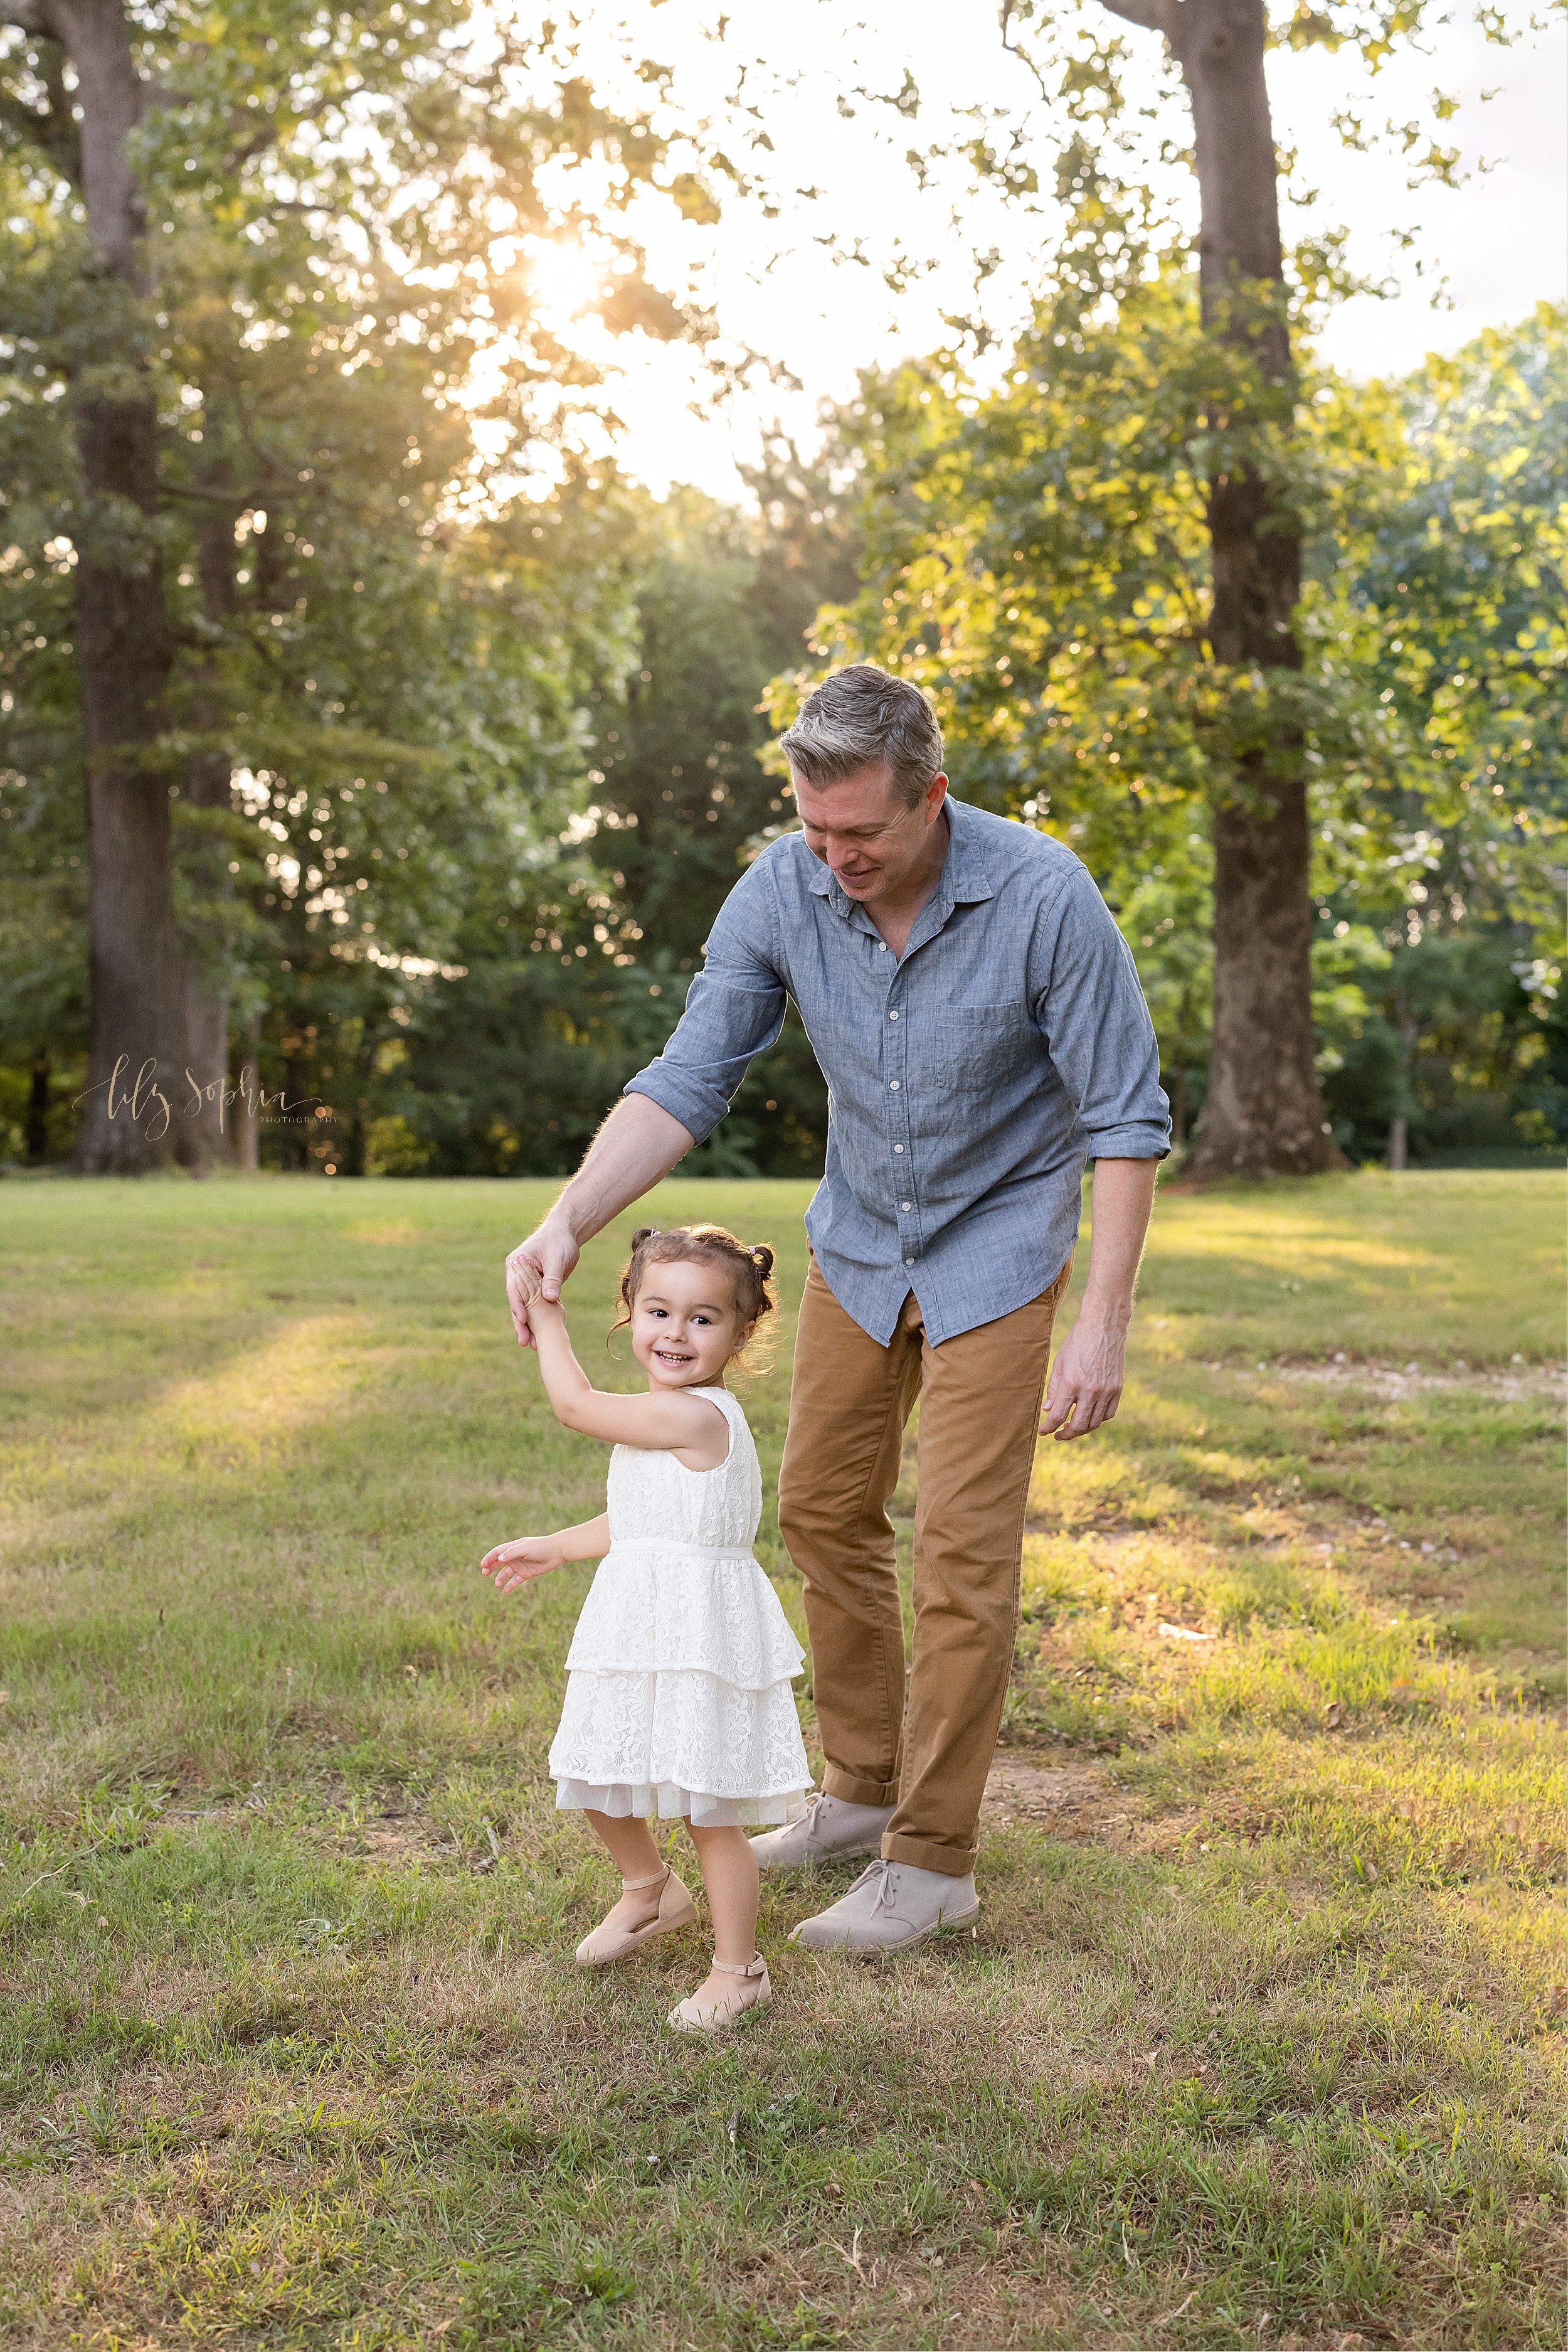  Family portrait of a young daughter dancing with her father at sunset in an Atlanta park. 